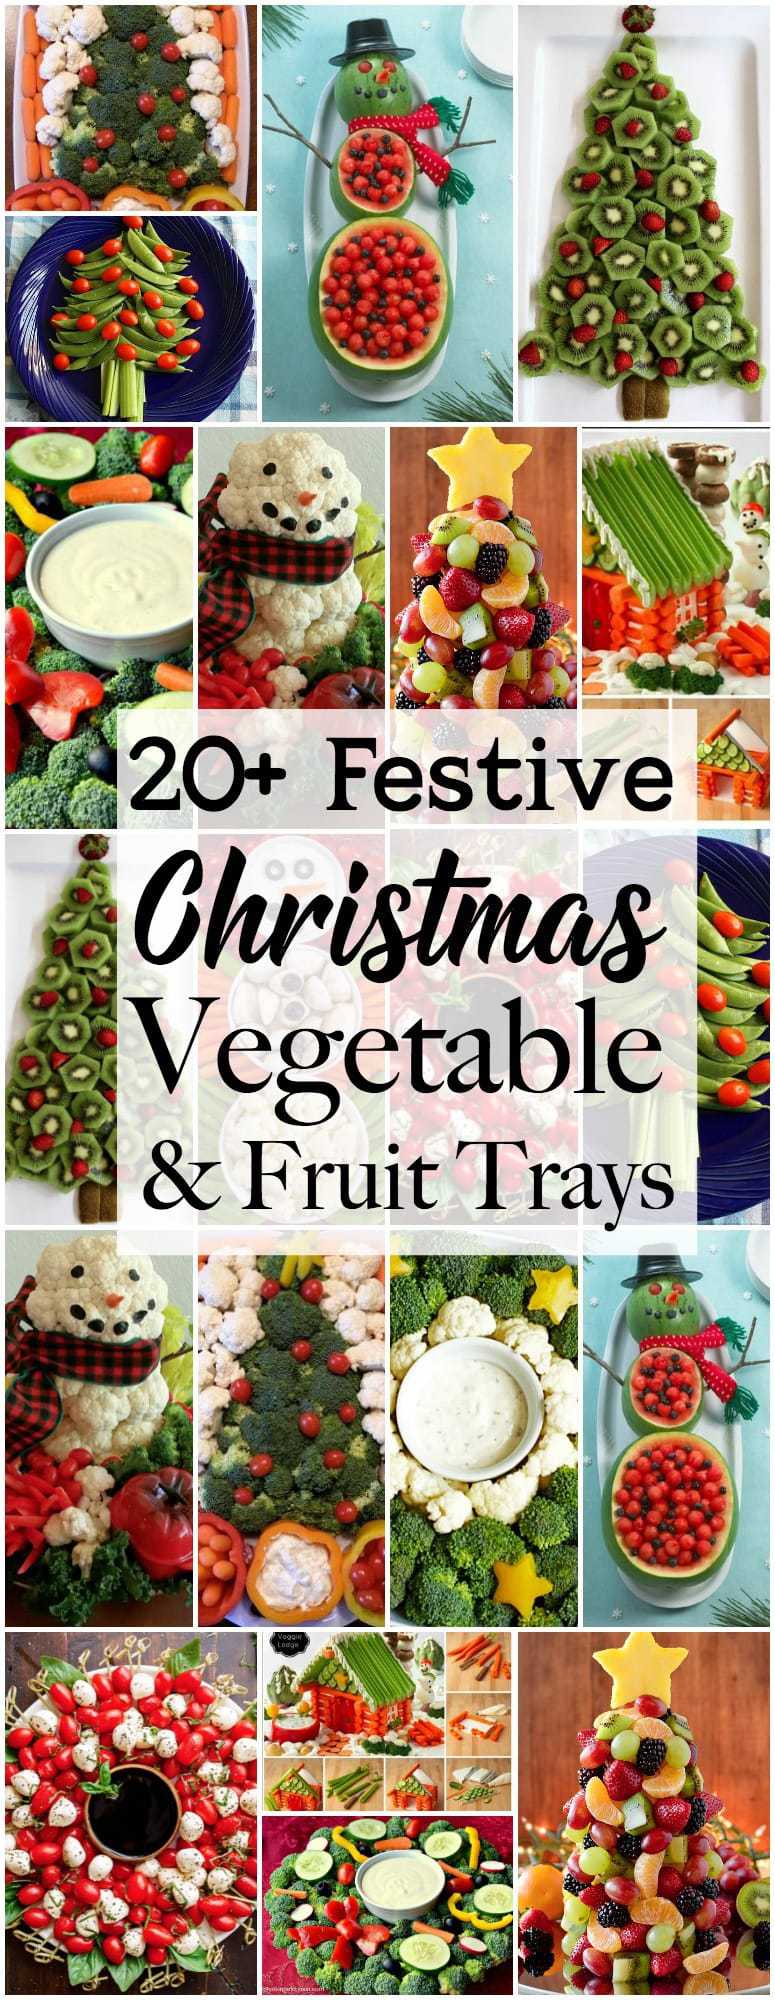 Holiday Vegetable Trays are festive, easy to make, healthy & delicious! Add fun to your Christmas table with one of these great vegetable and fruit tray ideas. Easy #Christmas #vegetable #fruit #holiday ideas from Butter With A Side of Bread